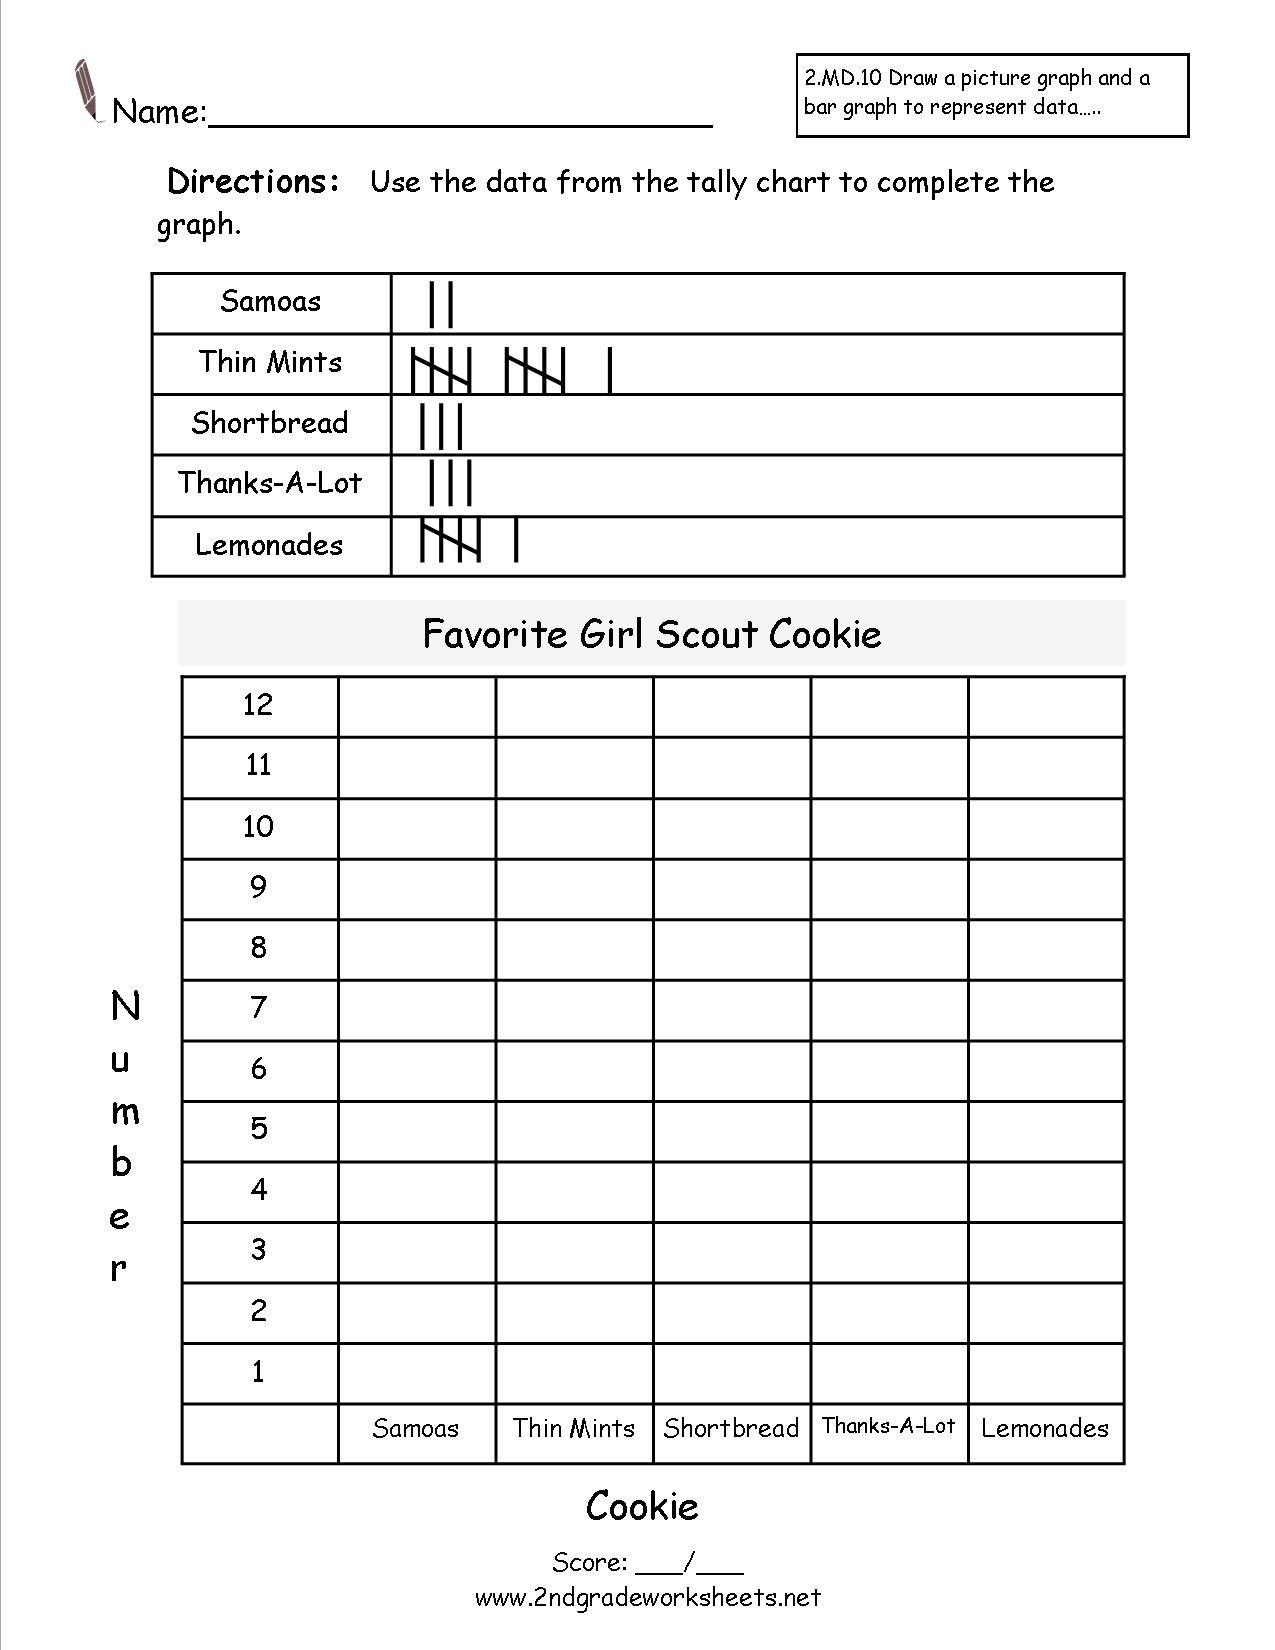 2nd Grade Pictograph Worksheets Bar Graphs and Pictographs Lessons Tes Teach